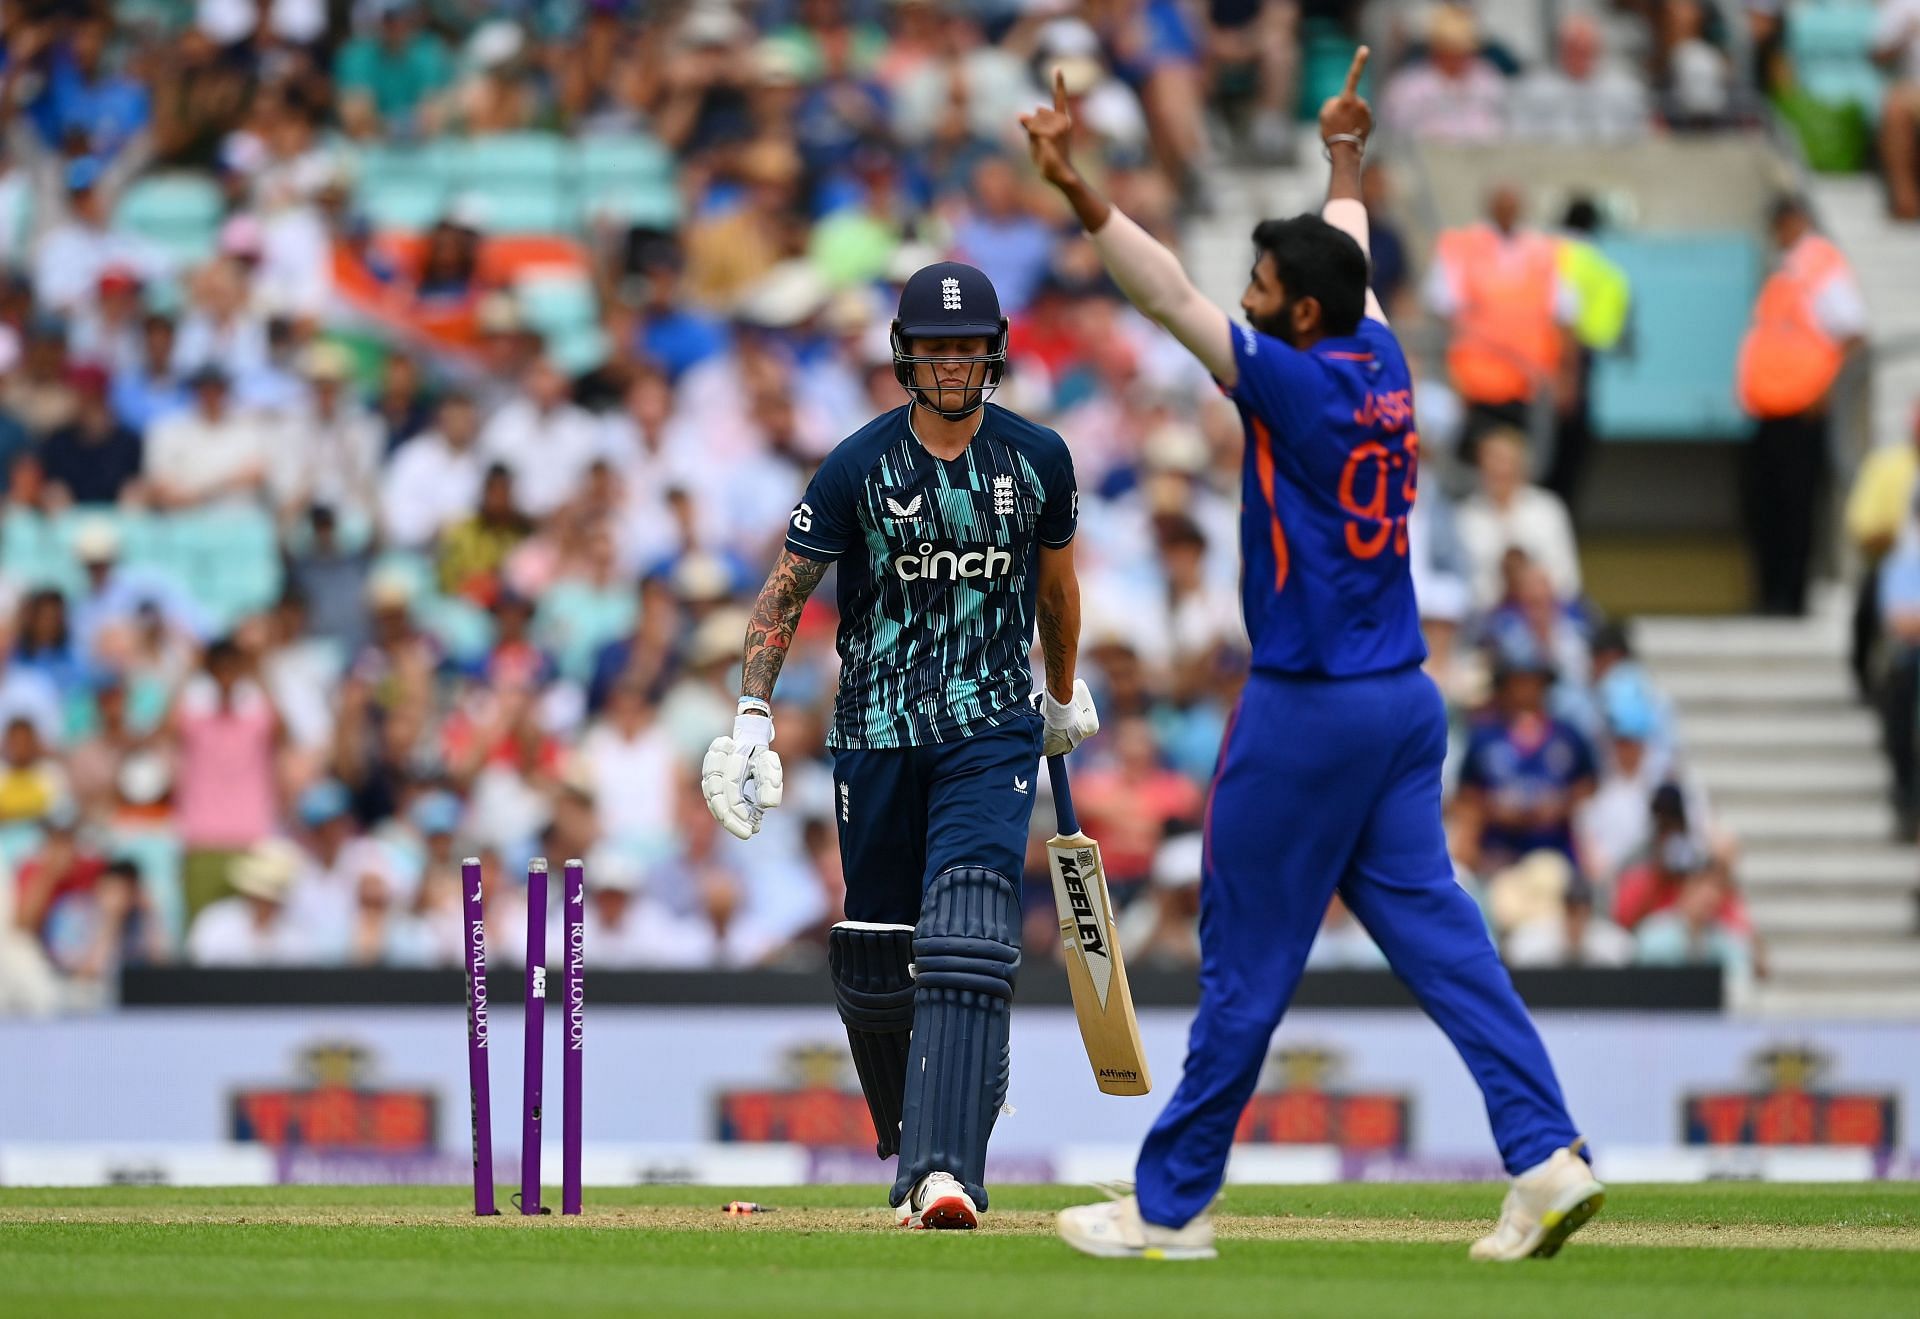 Jasprit Bumrah dismantled the England batting lineup in the first ODI